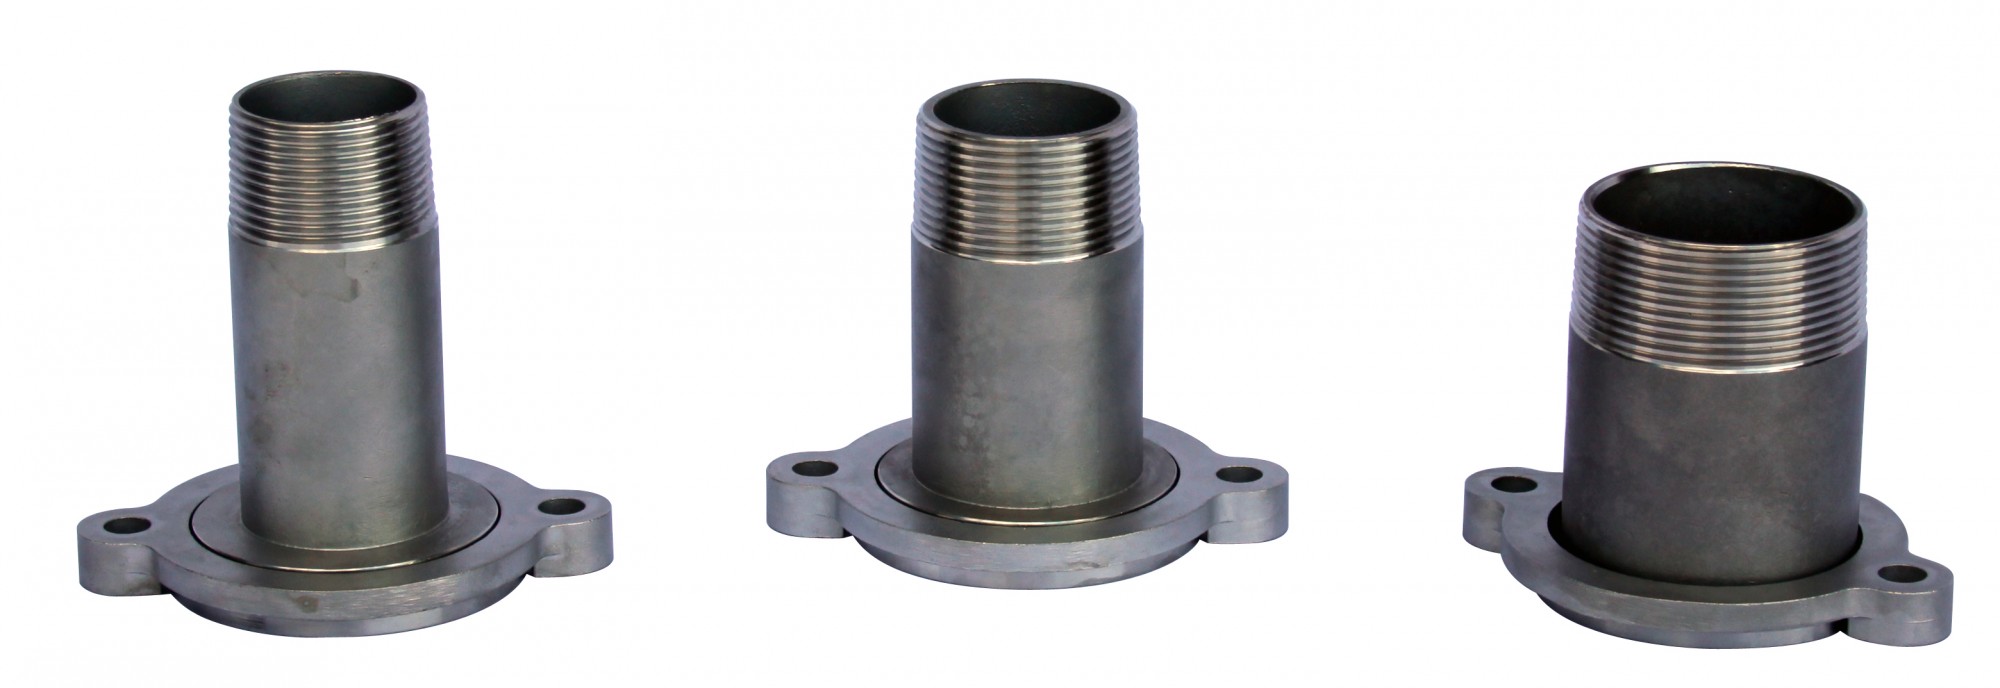 Stainless Steel Pump Adapter